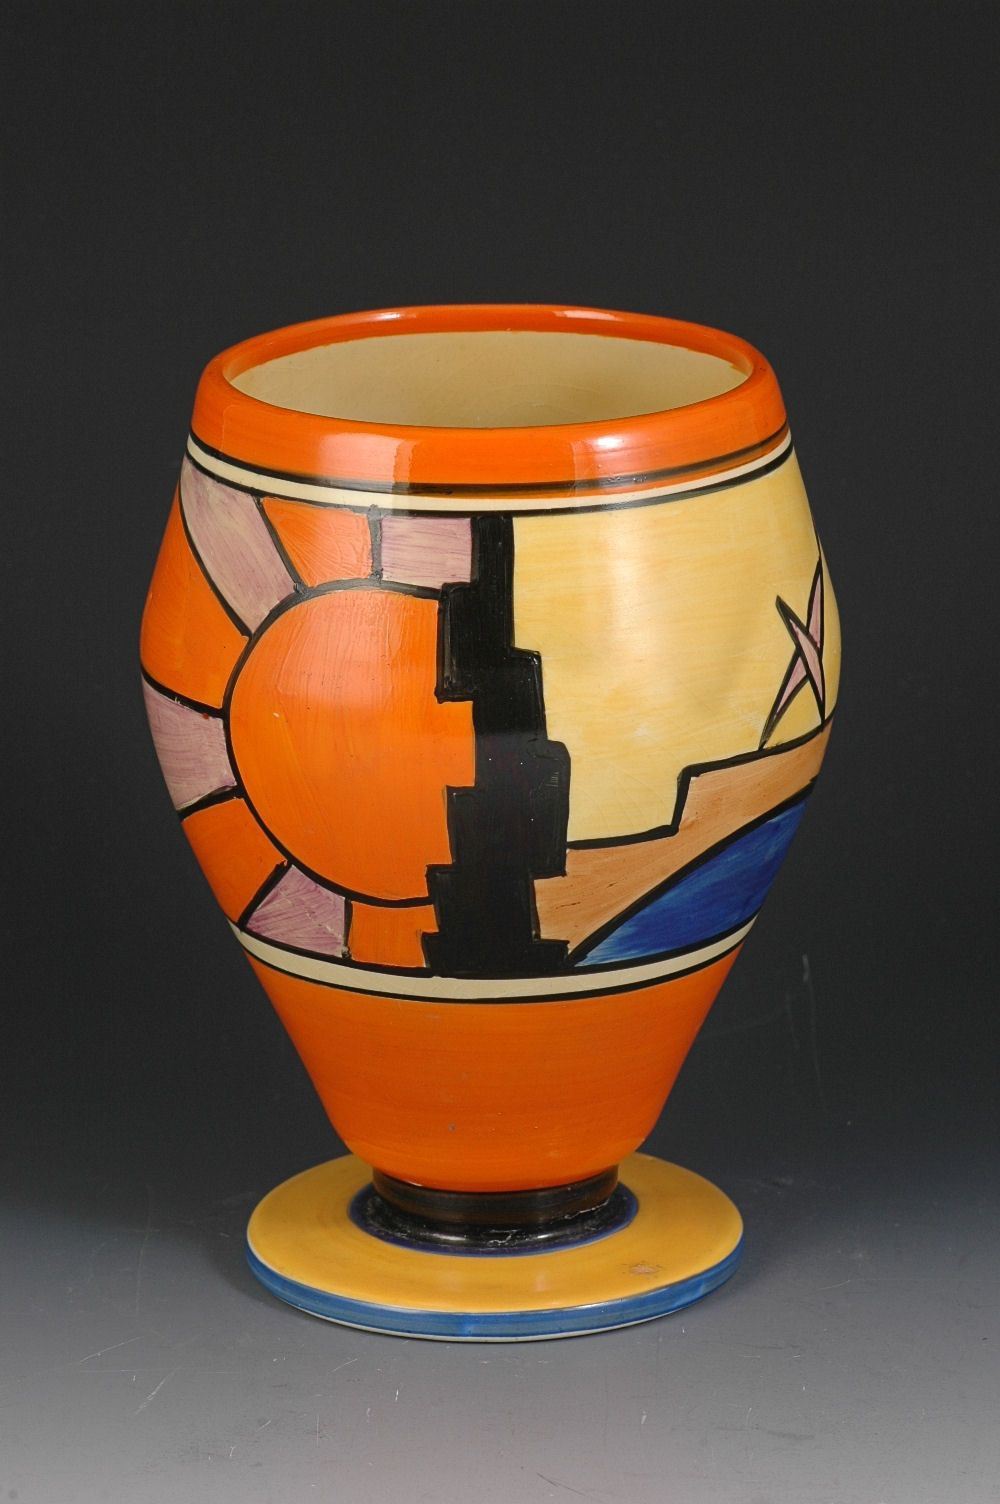 art nouveau pottery vase of andrew muir clarice cliff art deco pottery moorcroft and 20th intended for andrew muir clarice cliff art deco pottery moorcroft and 20th century ceramics dealerclarice